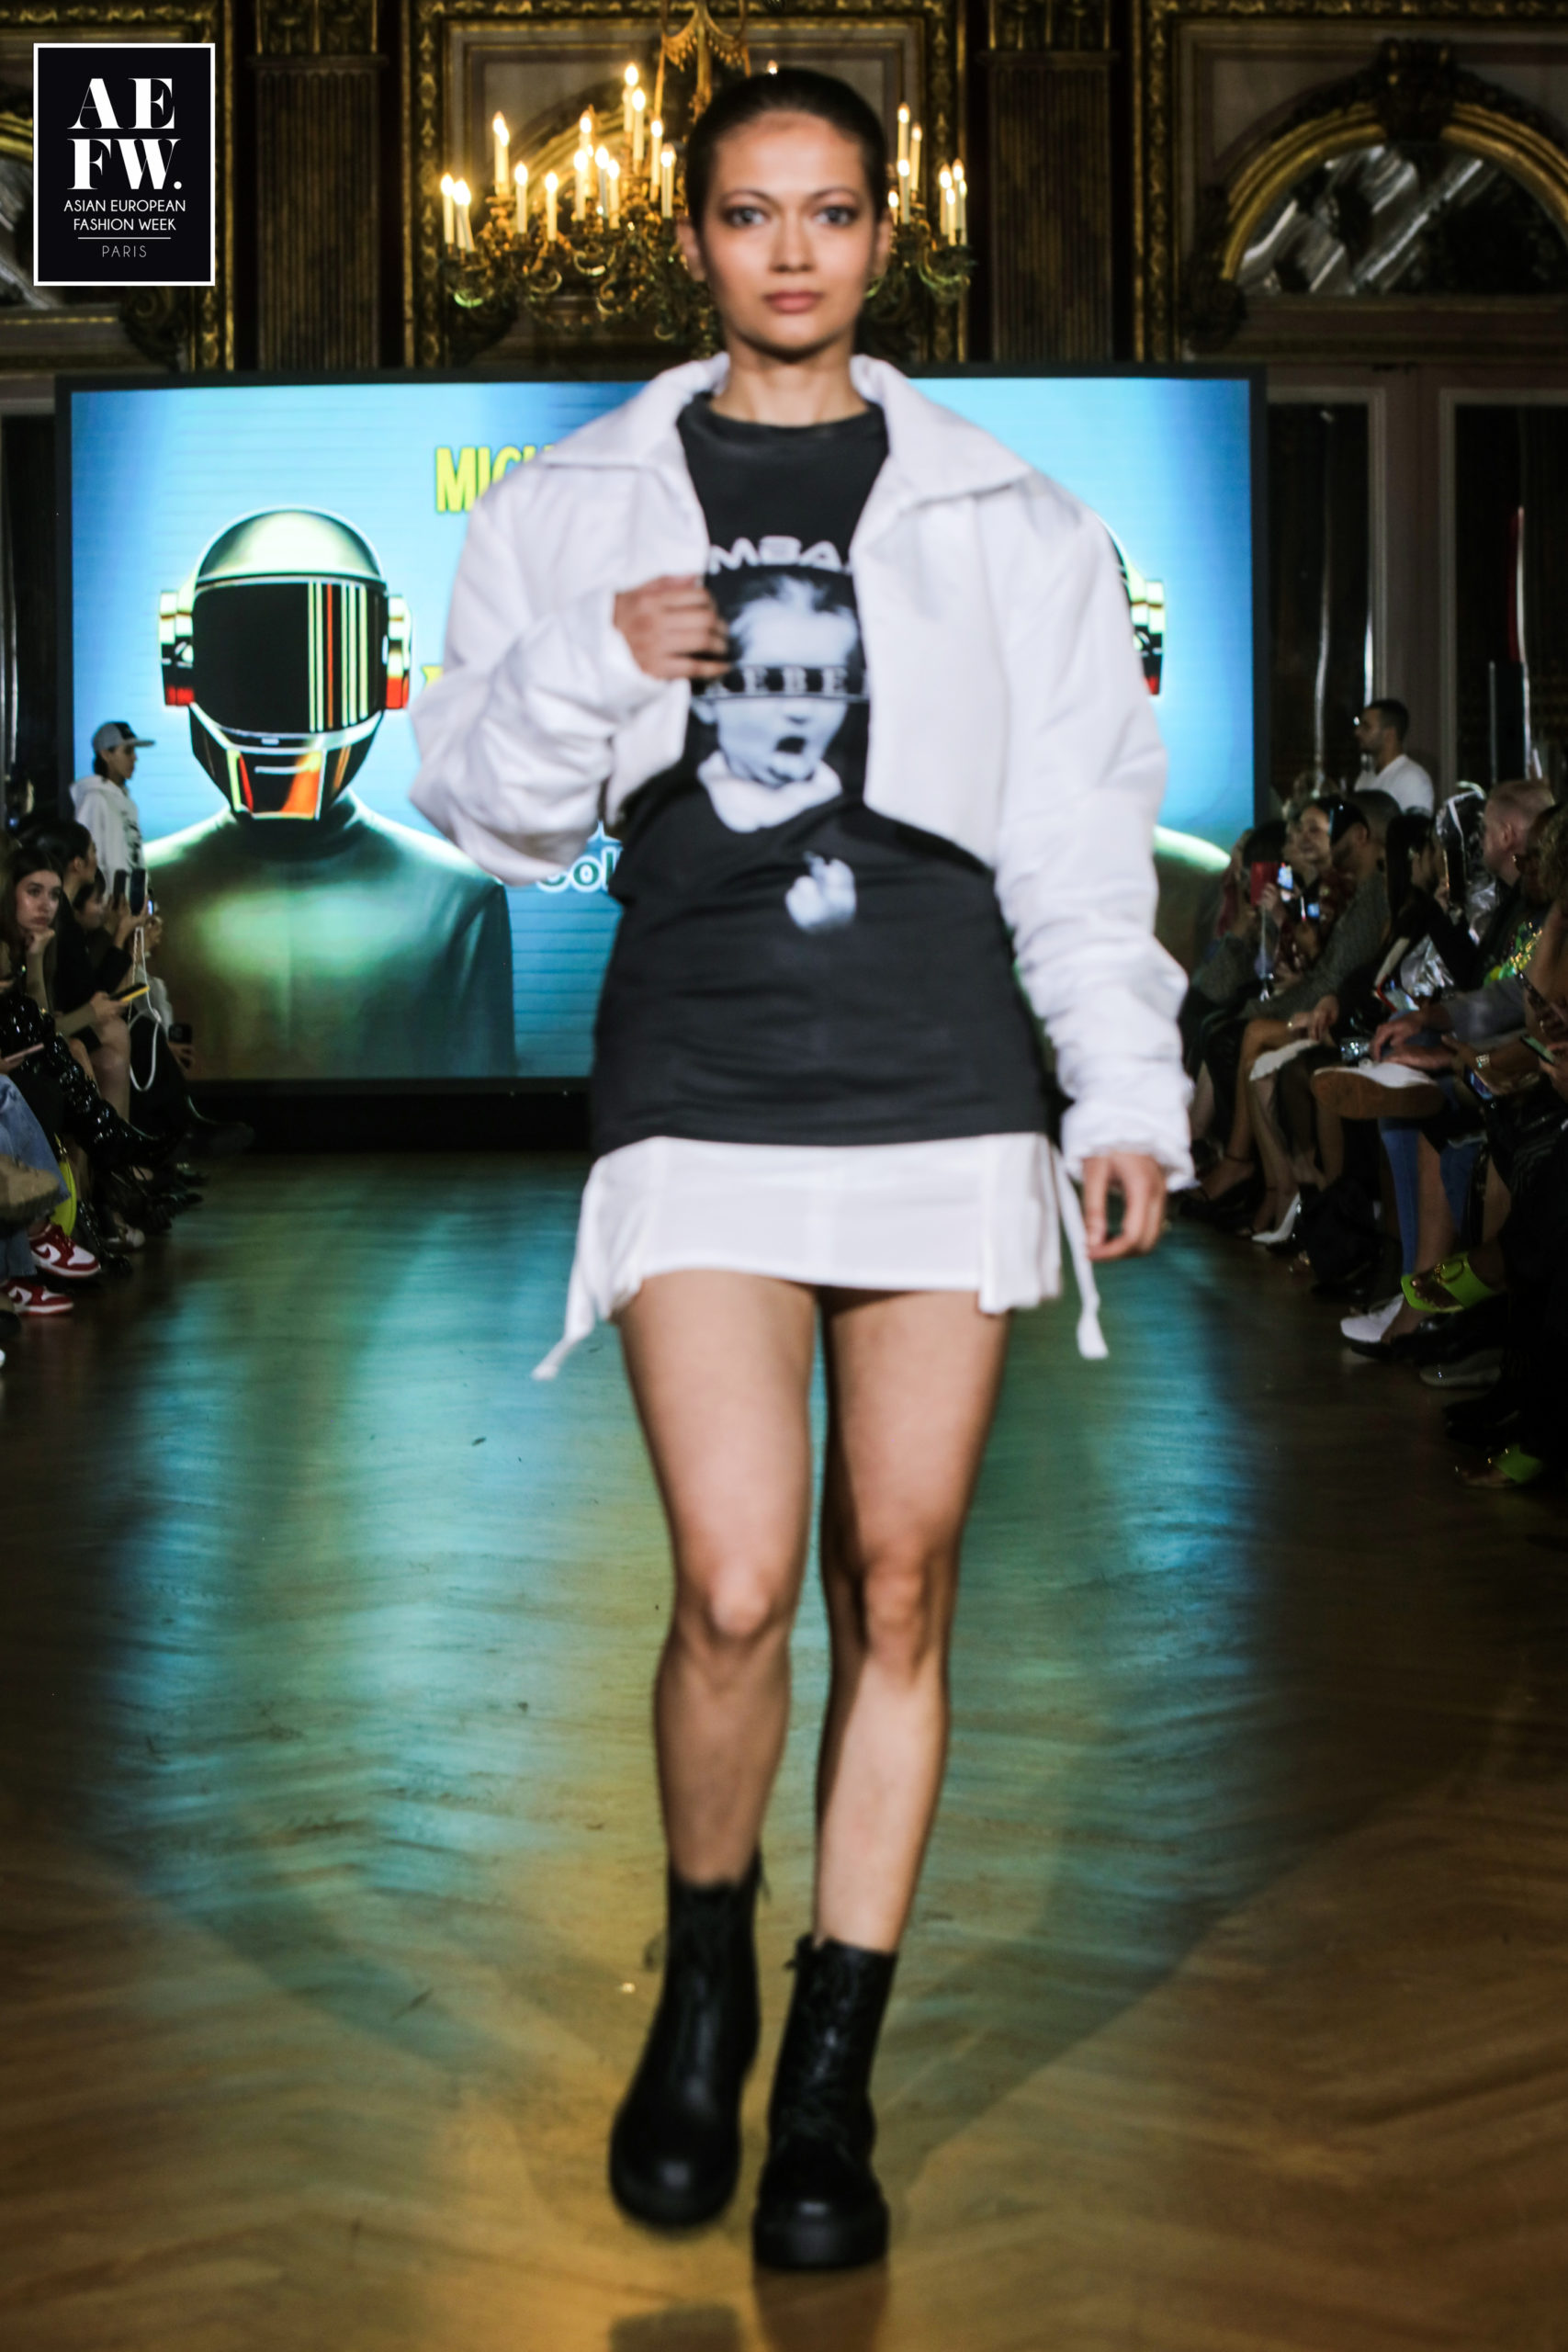 AEFW (Asian European Fashion Week - MICHAEL LOMBARD - The King of Leather - PFW SS24  -WEST IN PARIS-VENDOME